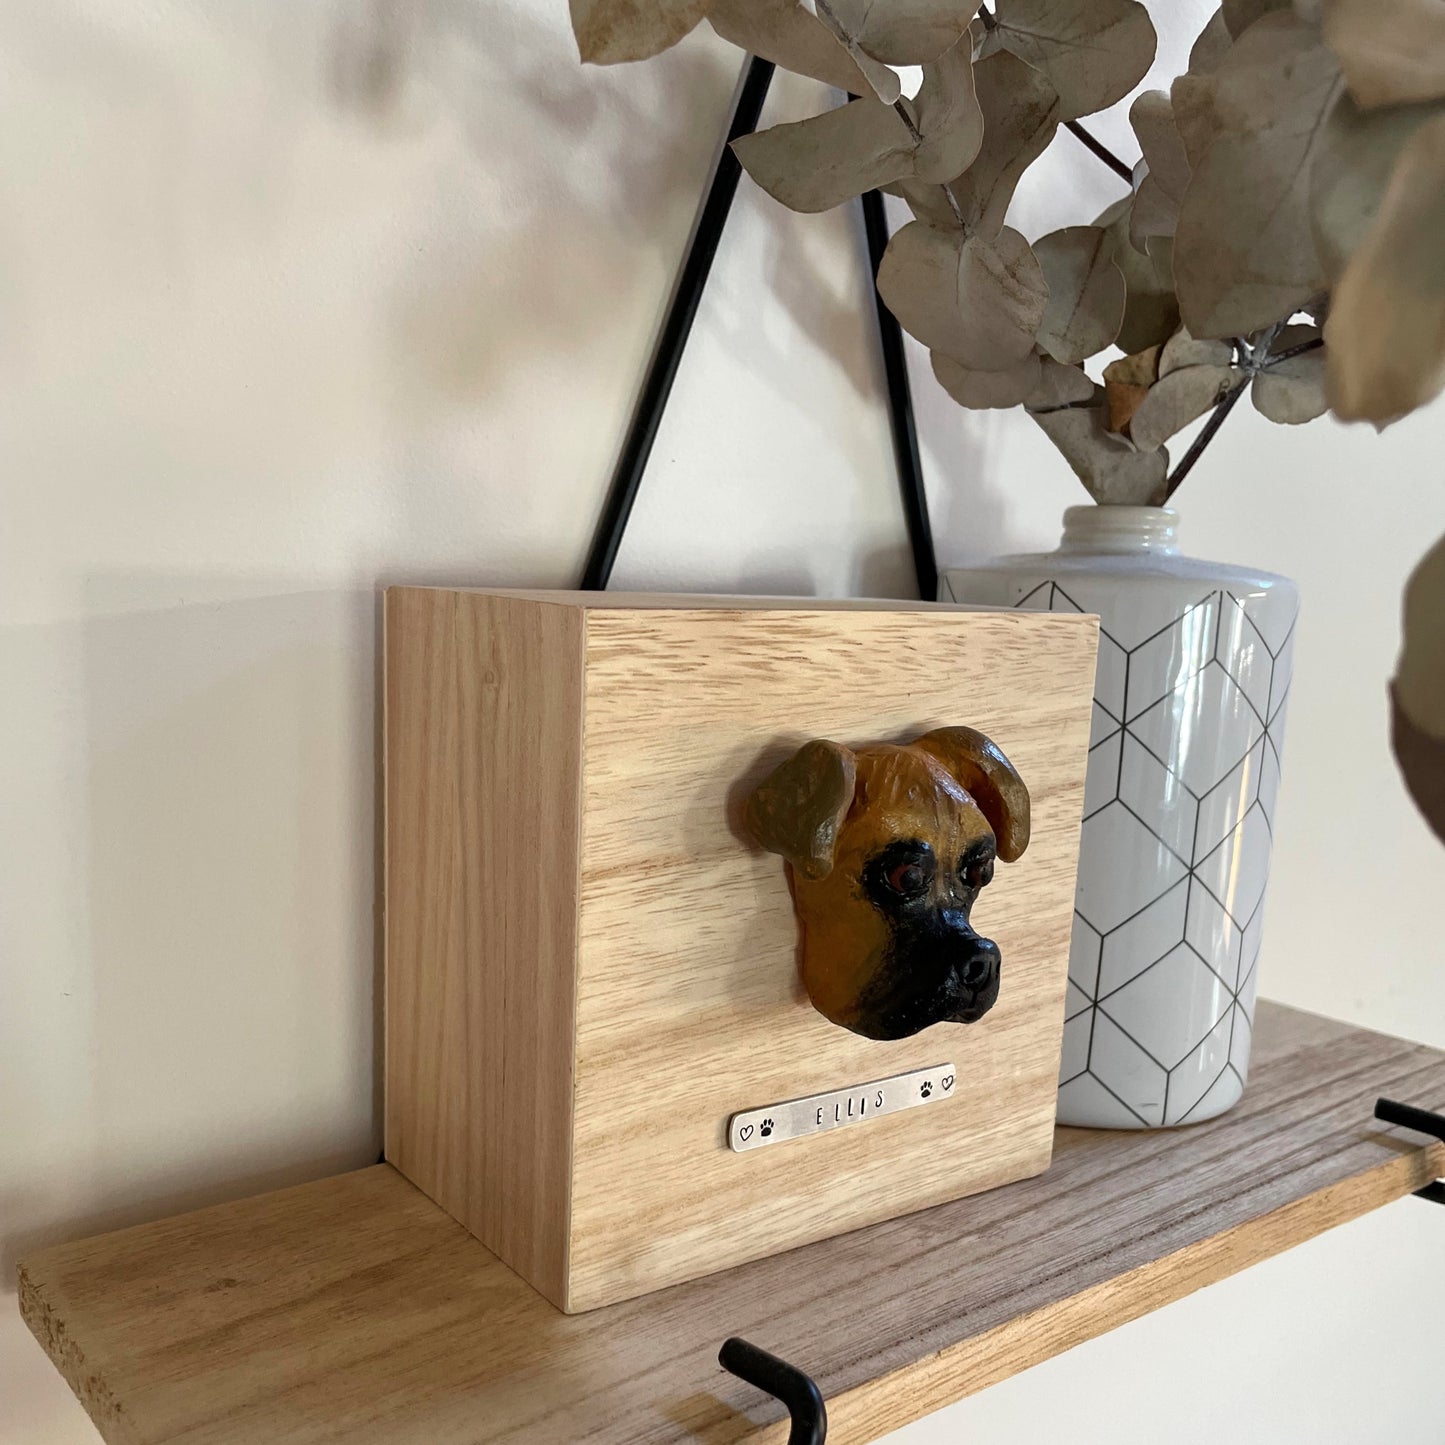 Custom timber pet memorial keepsake box with handscultped dog face on the lid, with a name plaque reading Ellis, sitting on a shelf.